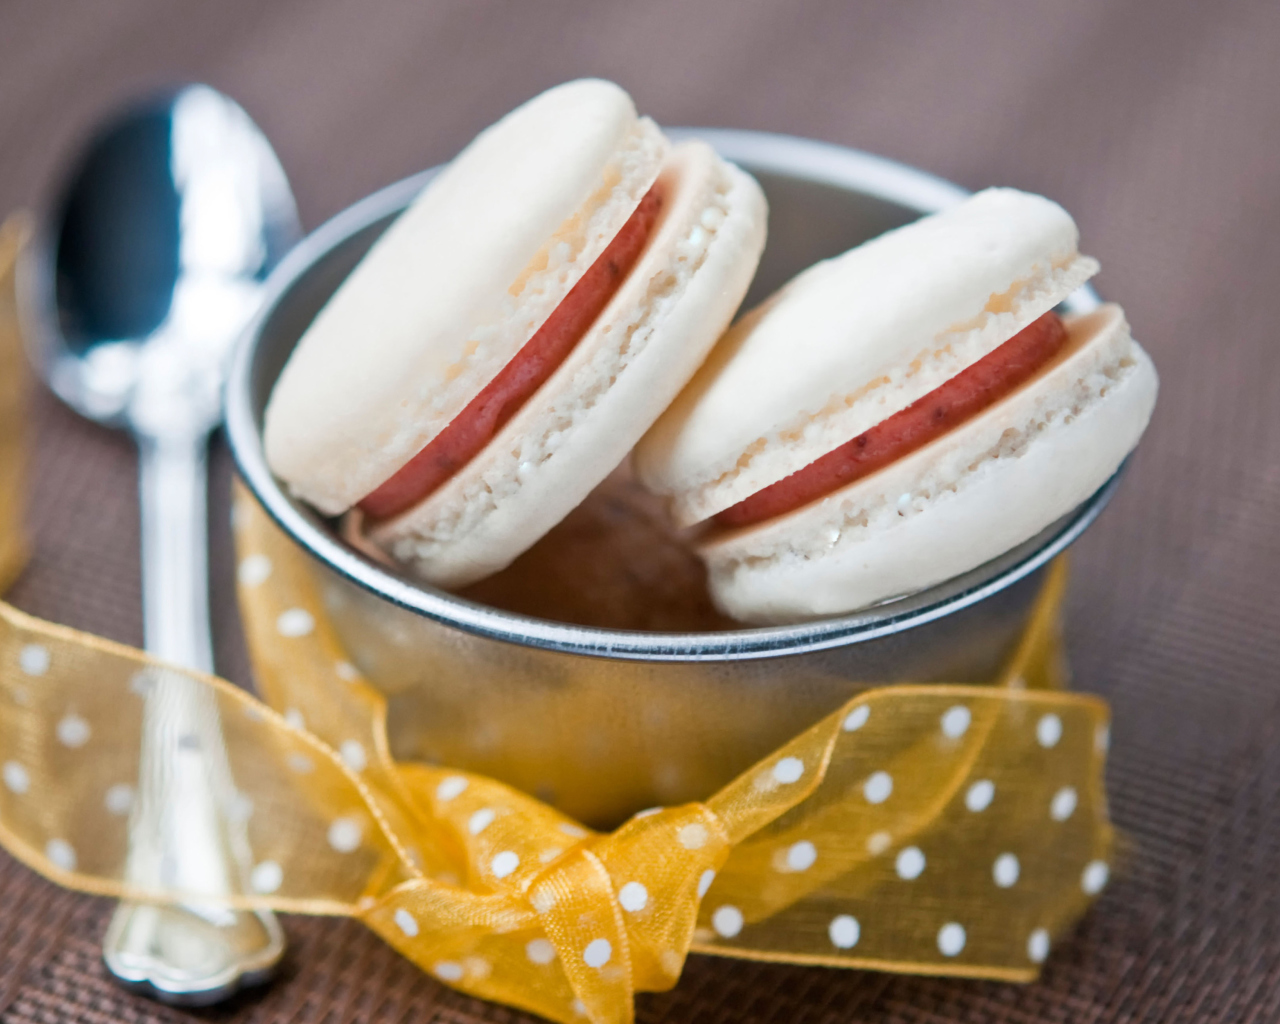 Macarons Decorate With Ribbons wallpaper 1280x1024